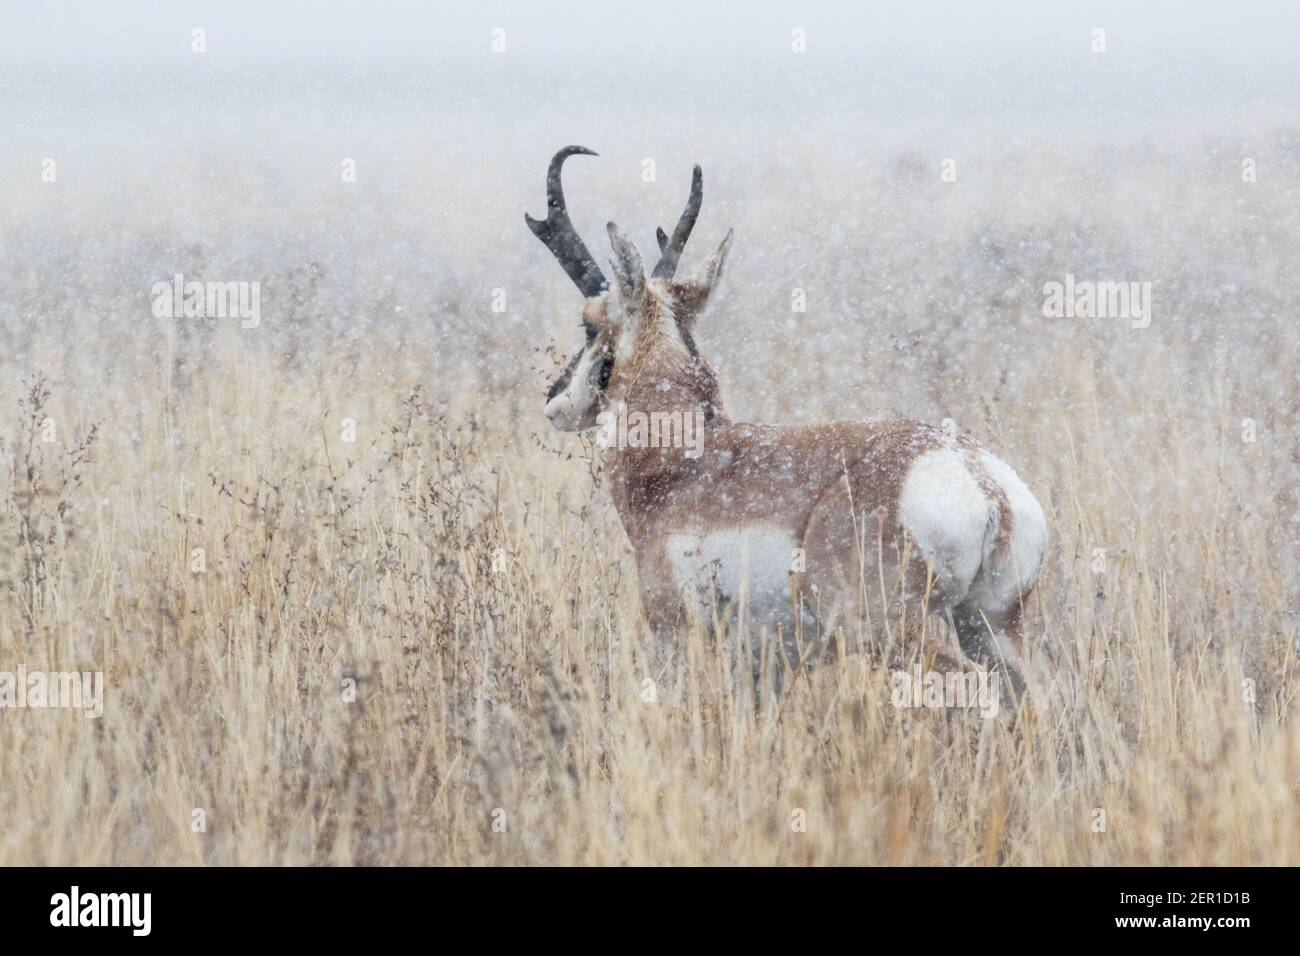 Portrait of a nice pronghorn antelope, Antilocapra americana, during an early snow squall in Wyoming USA. Stock Photo